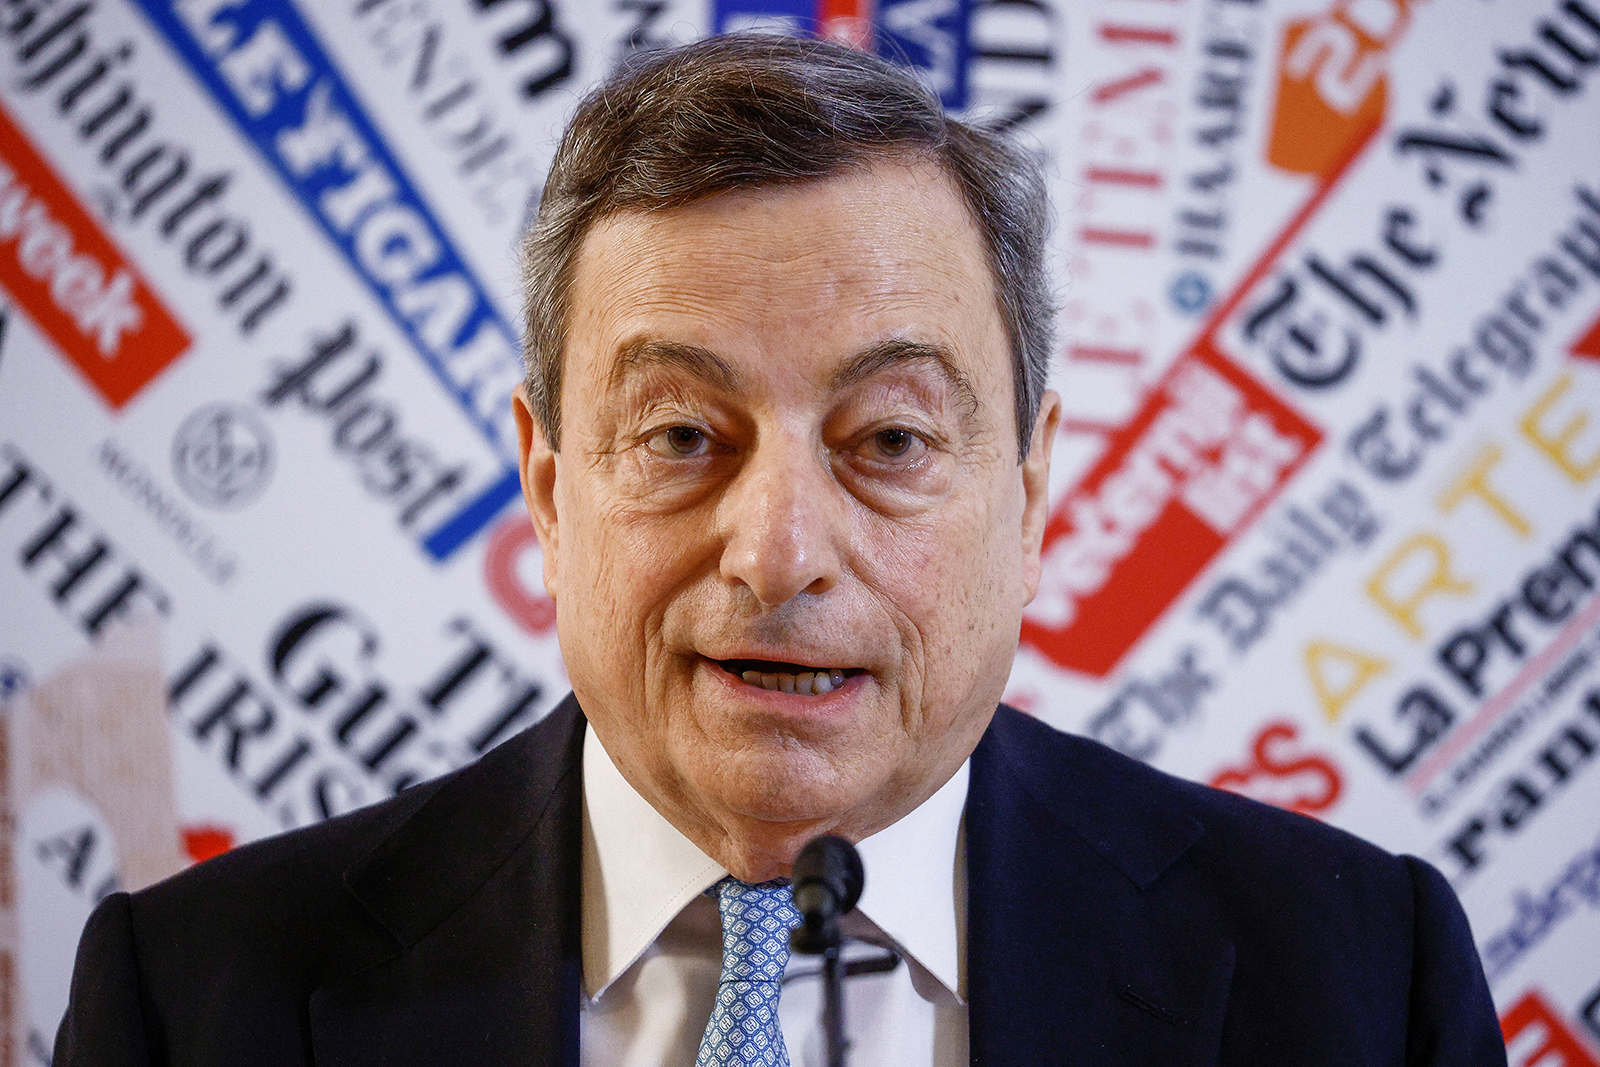 Italian Prime Minister Mario Draghi speaks during a news conference at Foreign Press Association in Rome, Italy, on March 31.